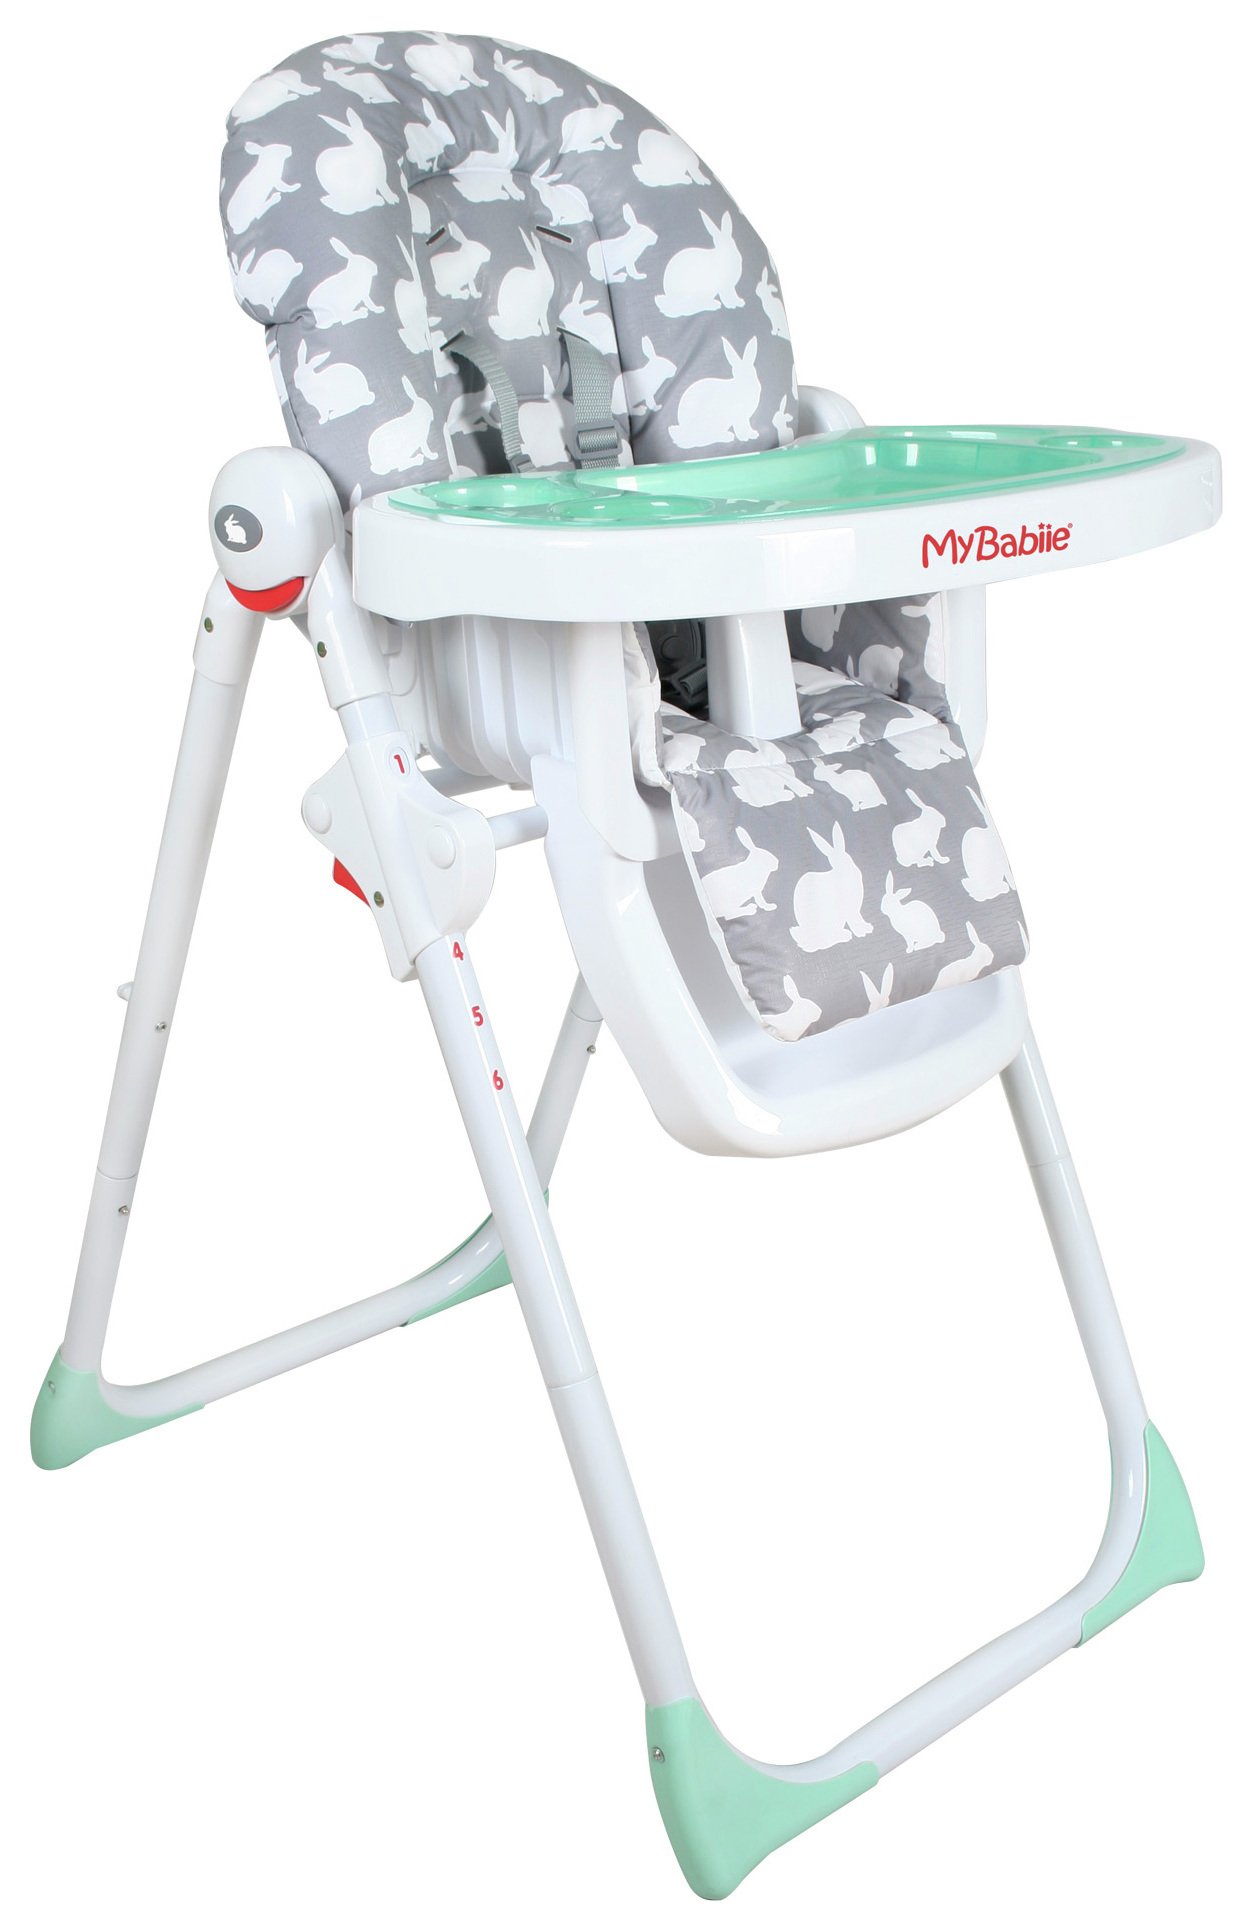 Buy My Babiie MBHC8GR Grey Rabbits Highchair at Argos.co.uk - Your